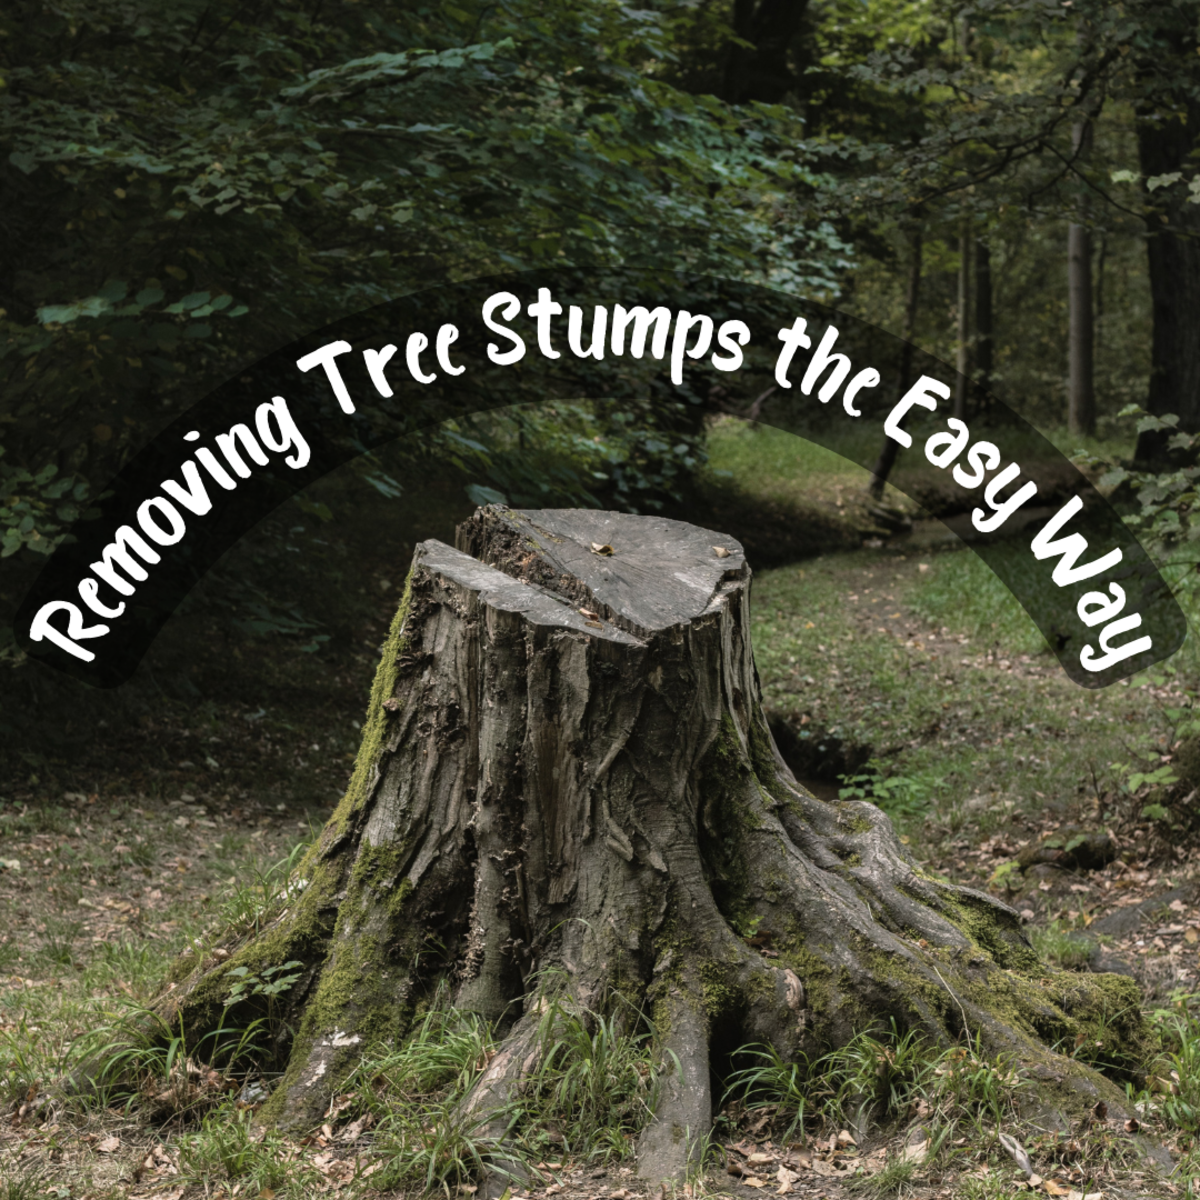 Learn how to remove tree stumps easily.